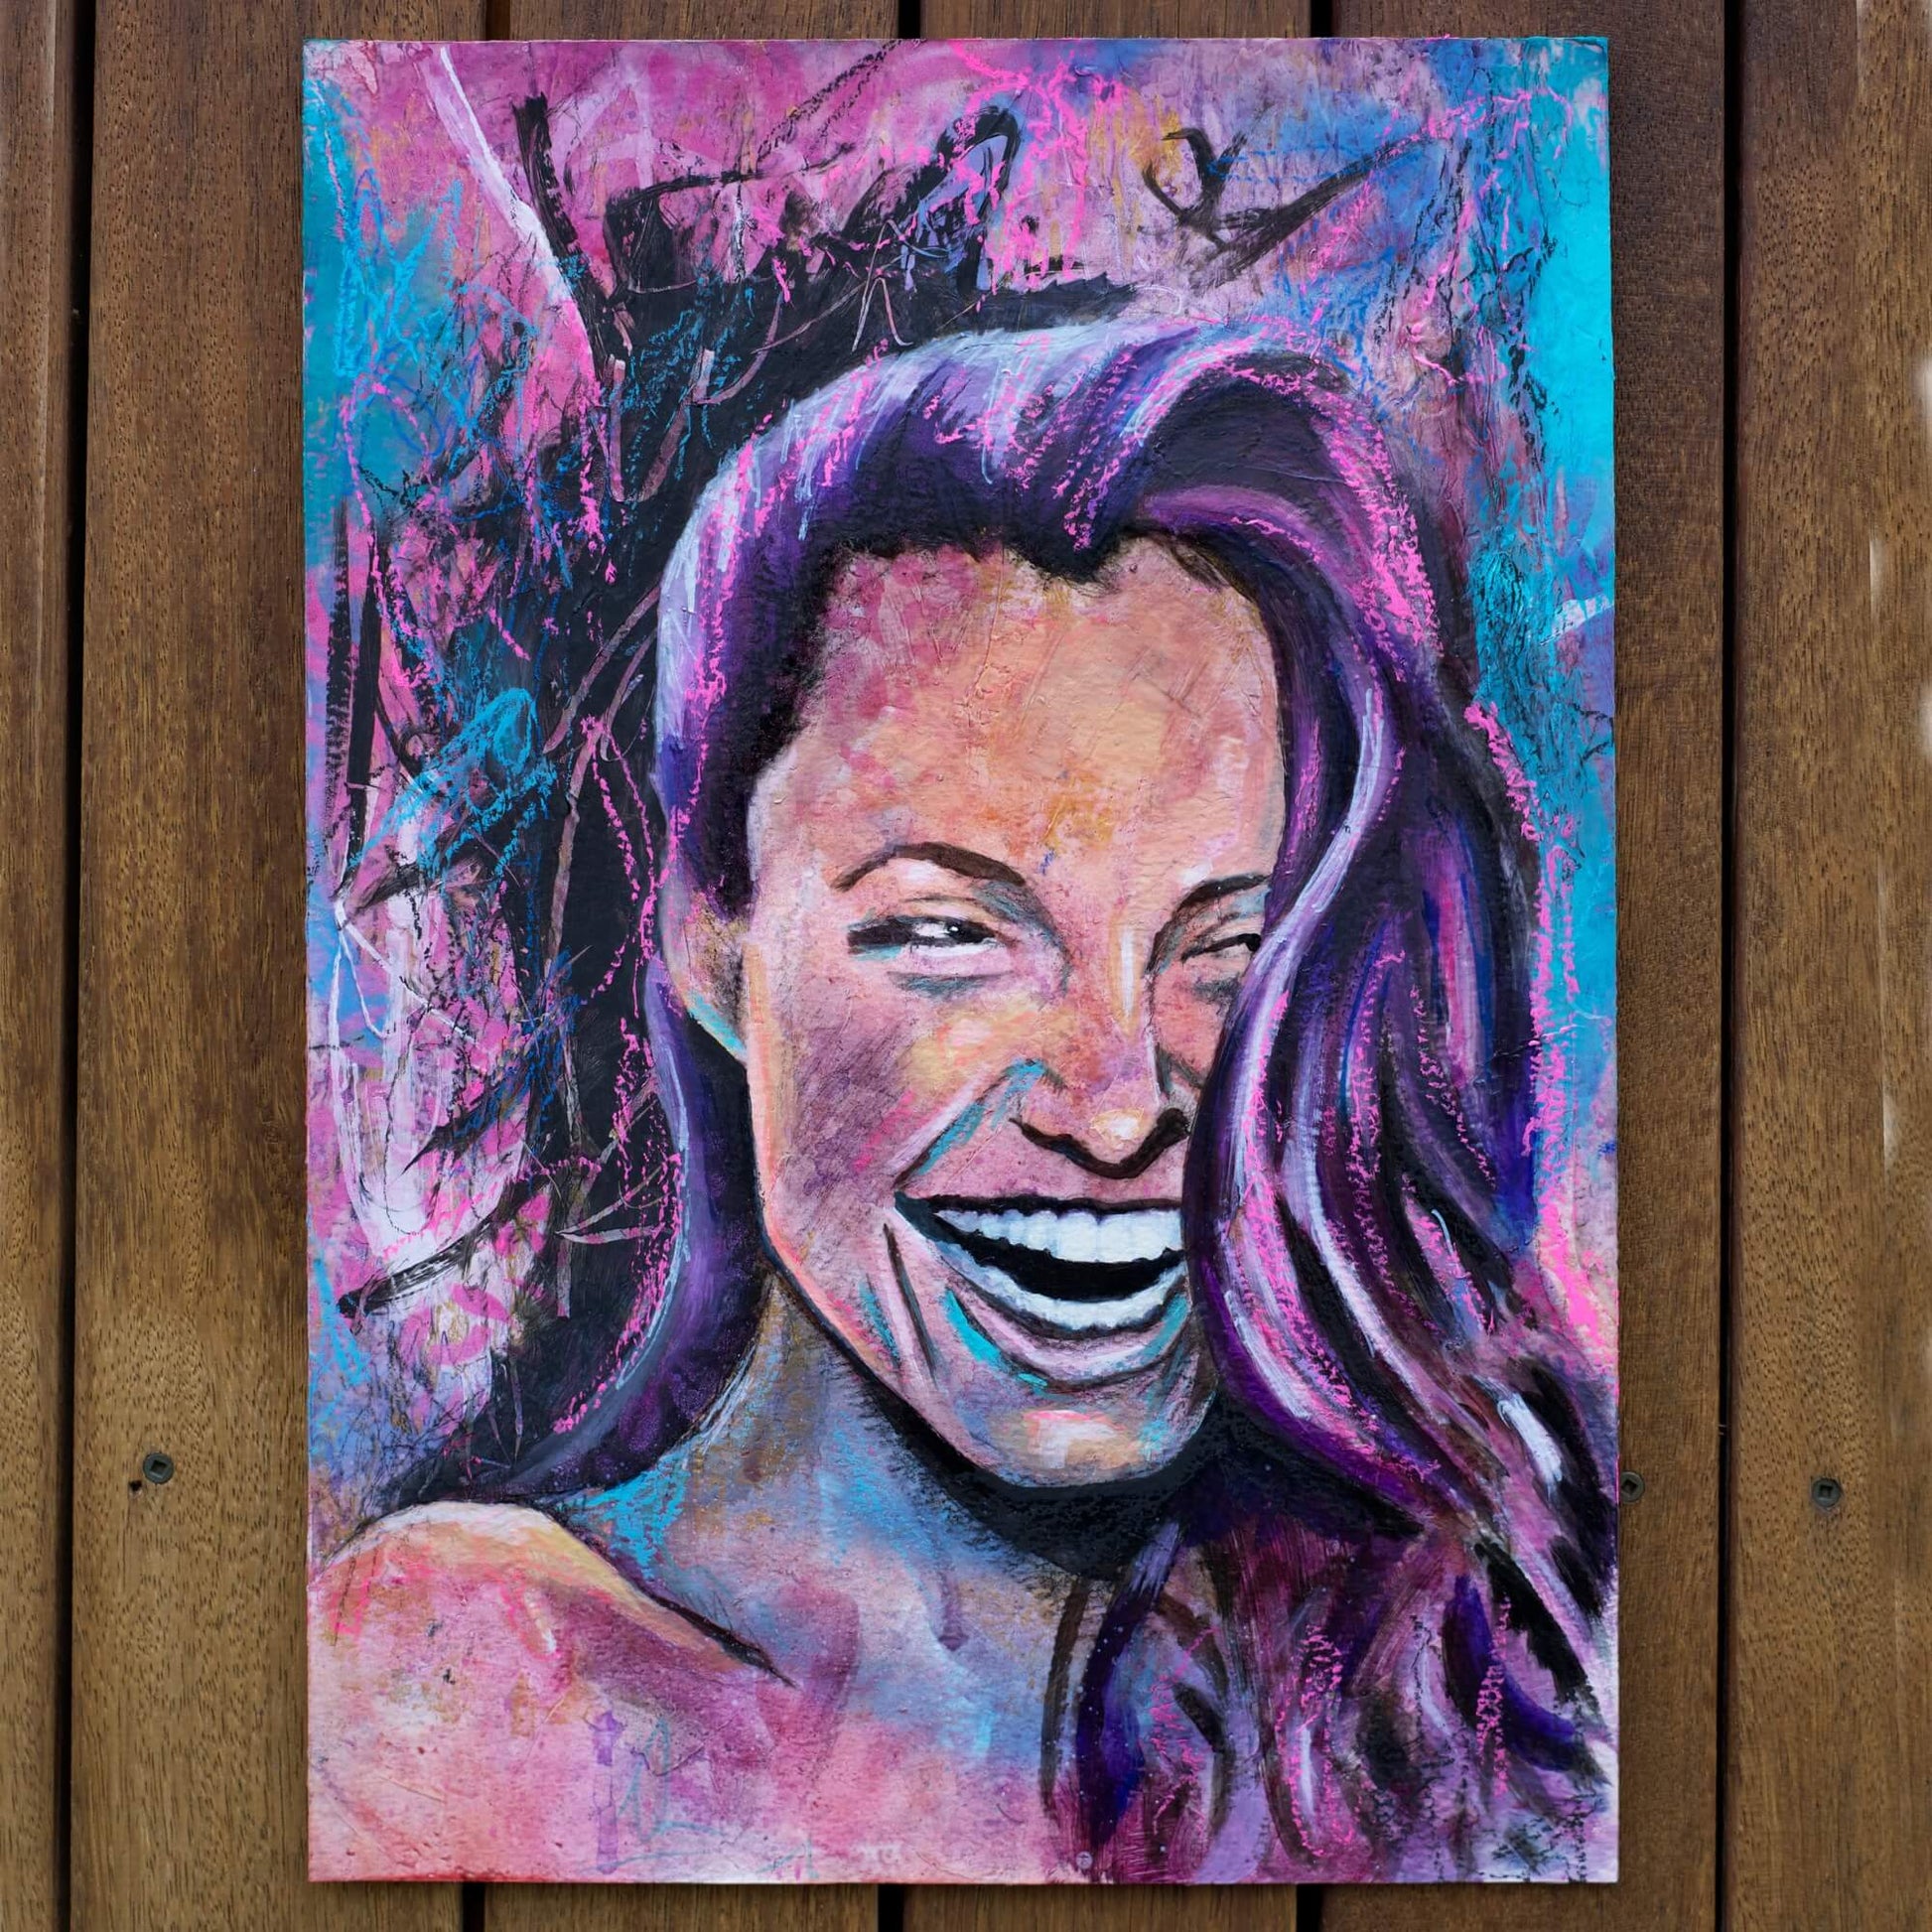 art wall painting, colourful painting of a woman Angelina Jolie Fan art, woman laughing painting pink purple blue